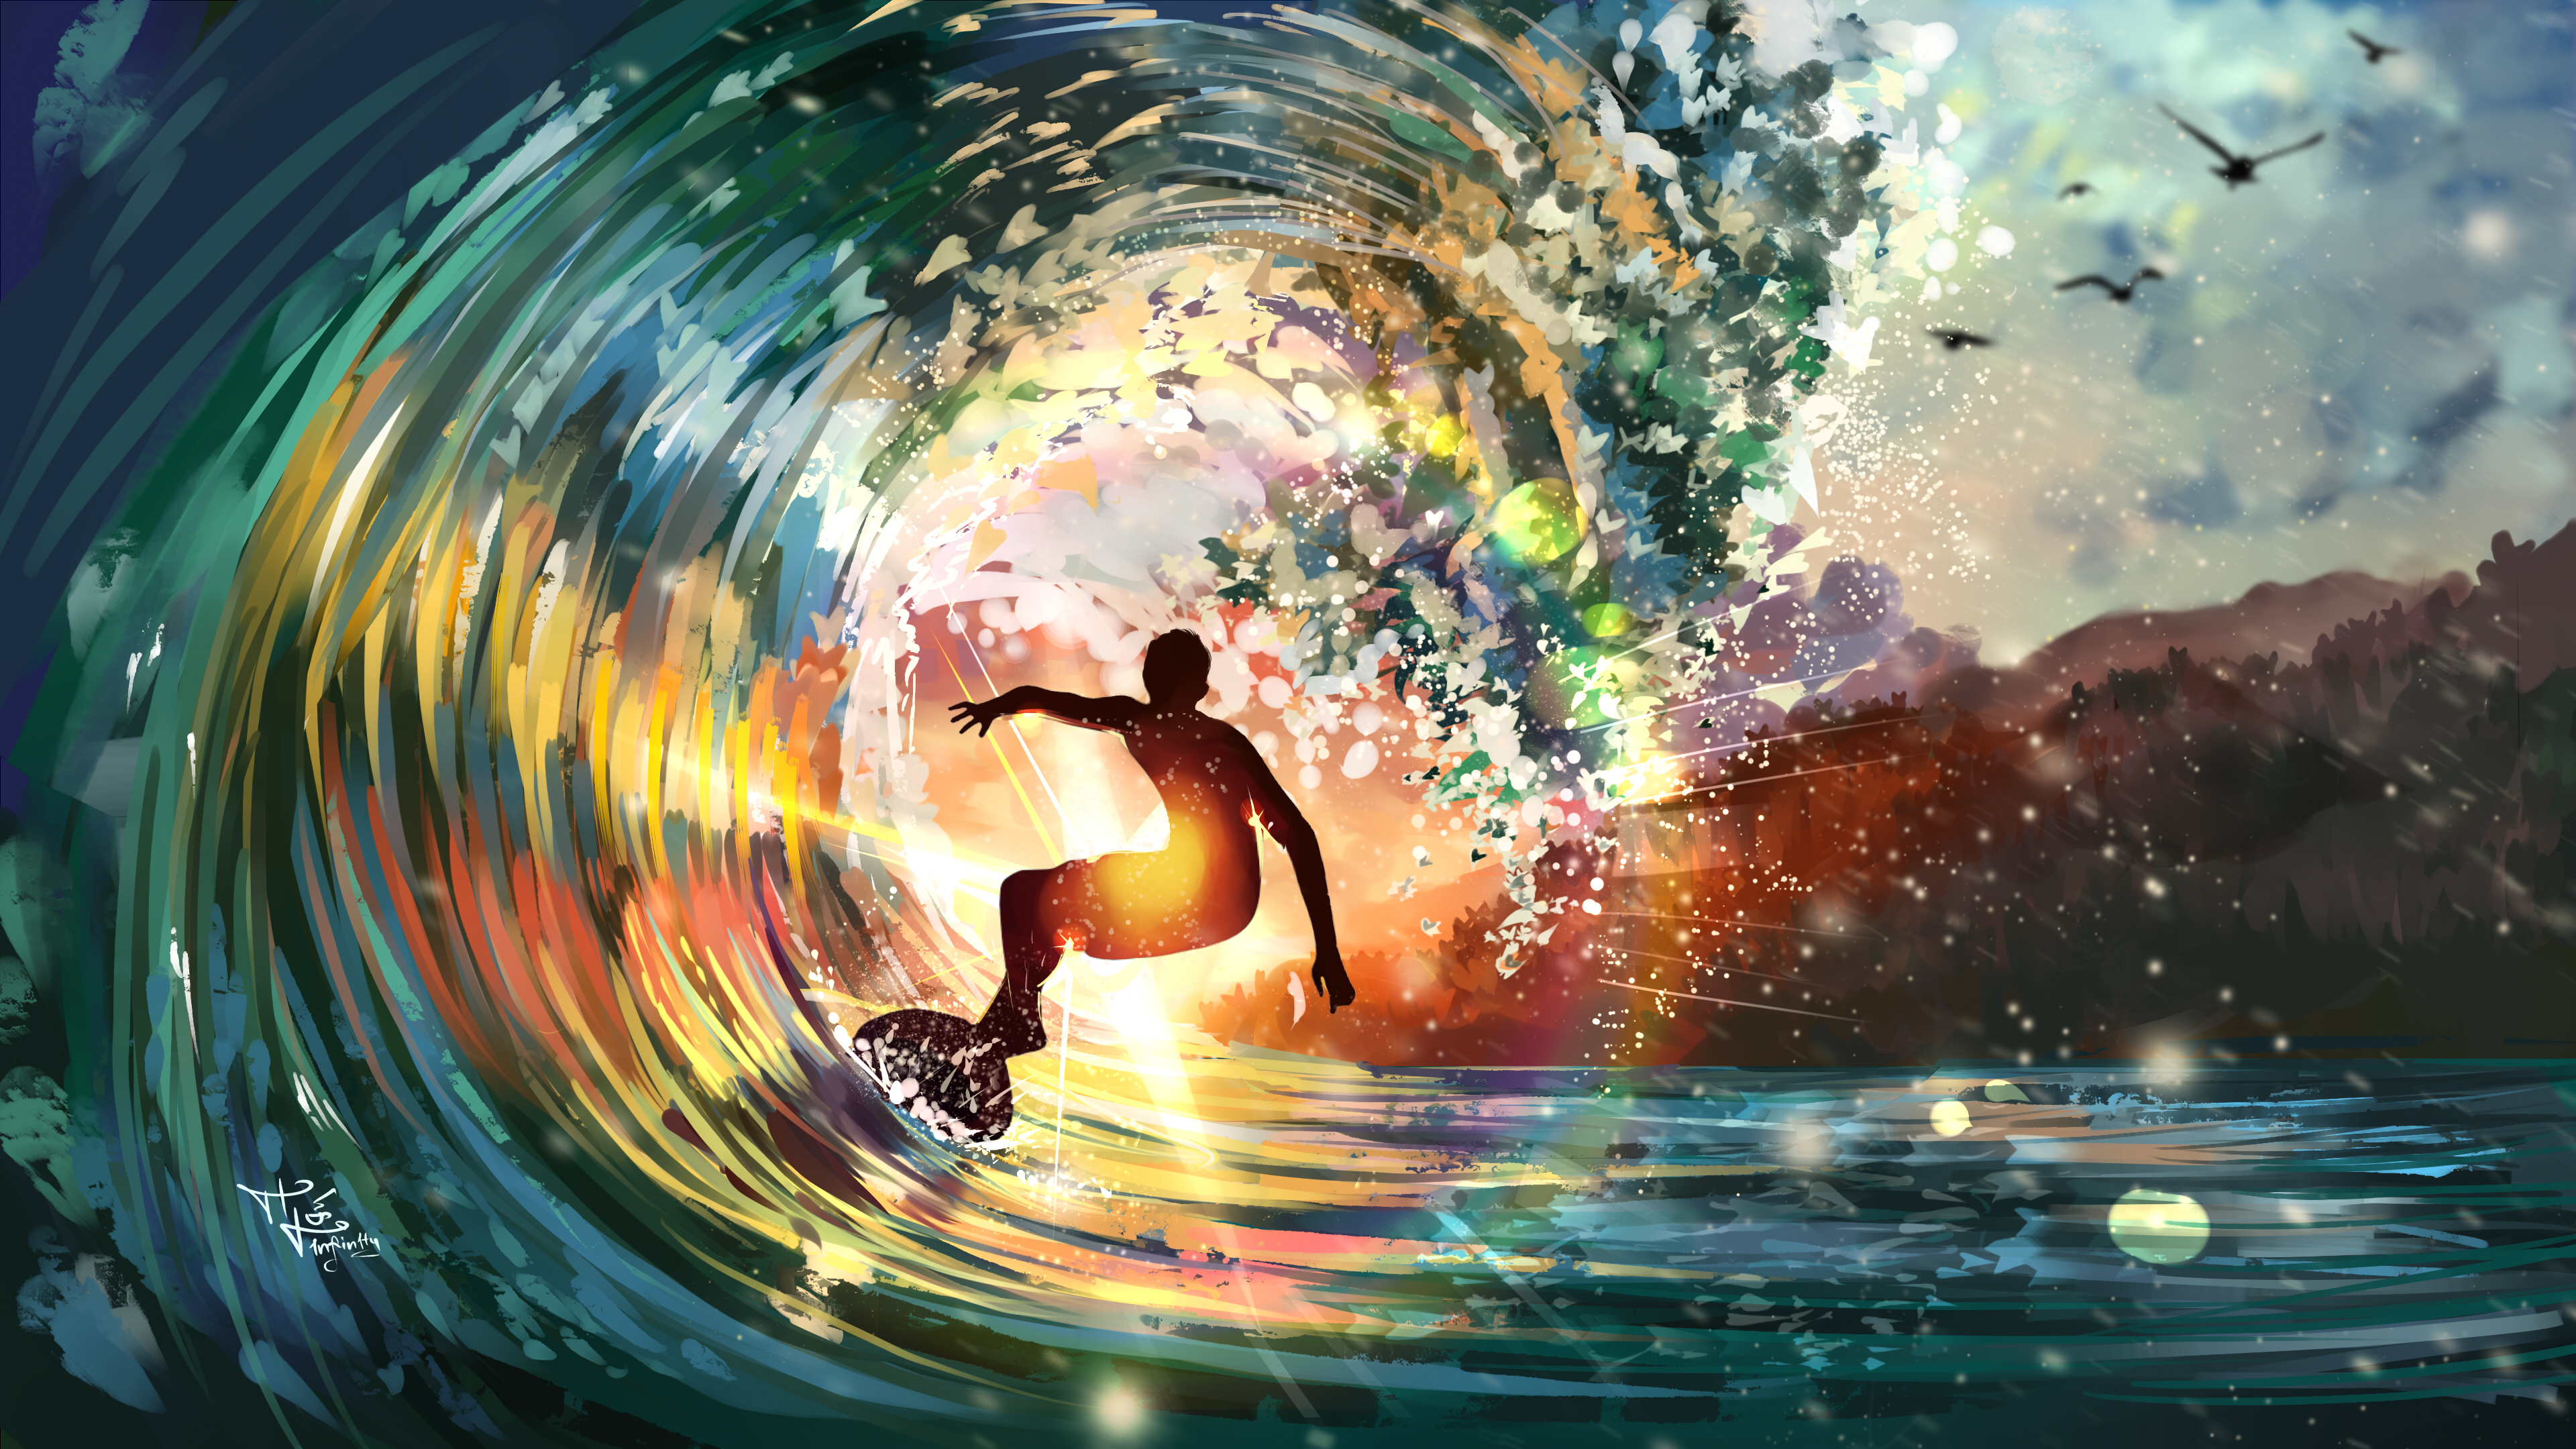 General 3840x2160 digital art artwork illustration drawing digital painting surfers surfing waves nature Sun sun rays sunset summer water sea people silhouette animals birds tropical colorful sparkles landscape outdoors concept art